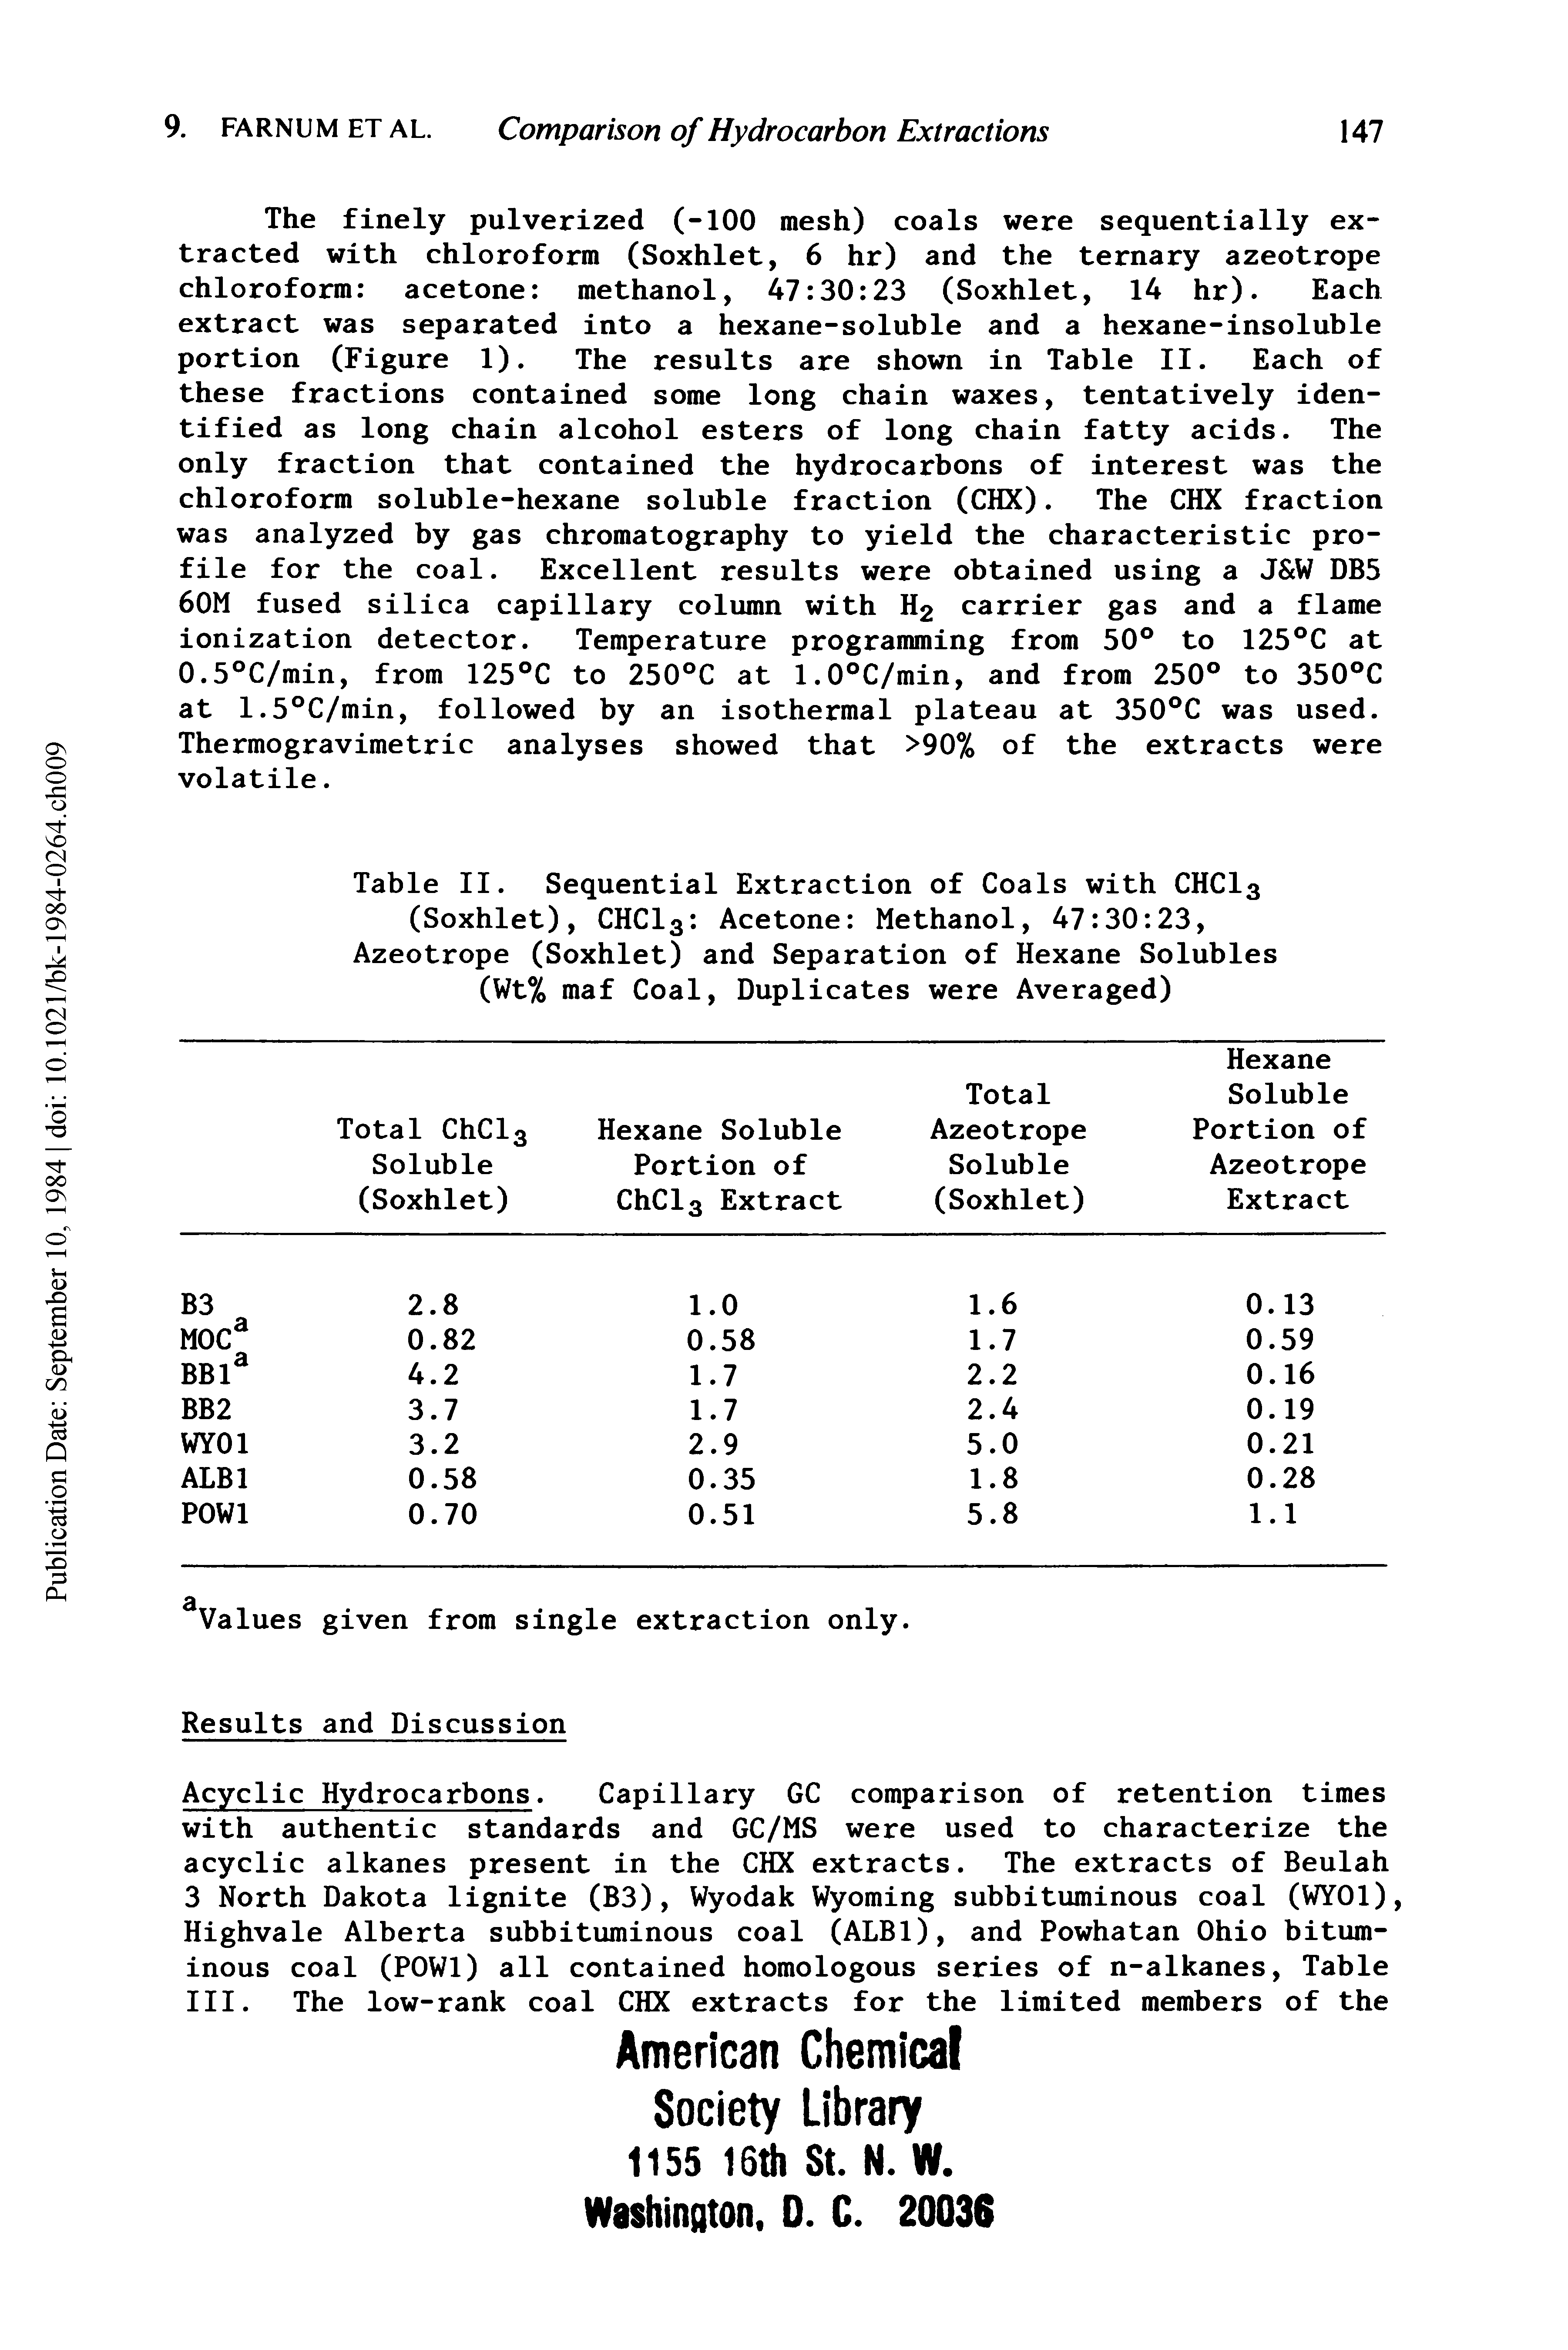 Table II. Sequential Extraction of Coals with CHCI3 (Soxhlet), CHCI3 Acetone Methanol, 47 30 23, Azeotrope (Soxhlet) and Separation of Hexane Solubles (Wt% maf Coal, Duplicates were Averaged)...